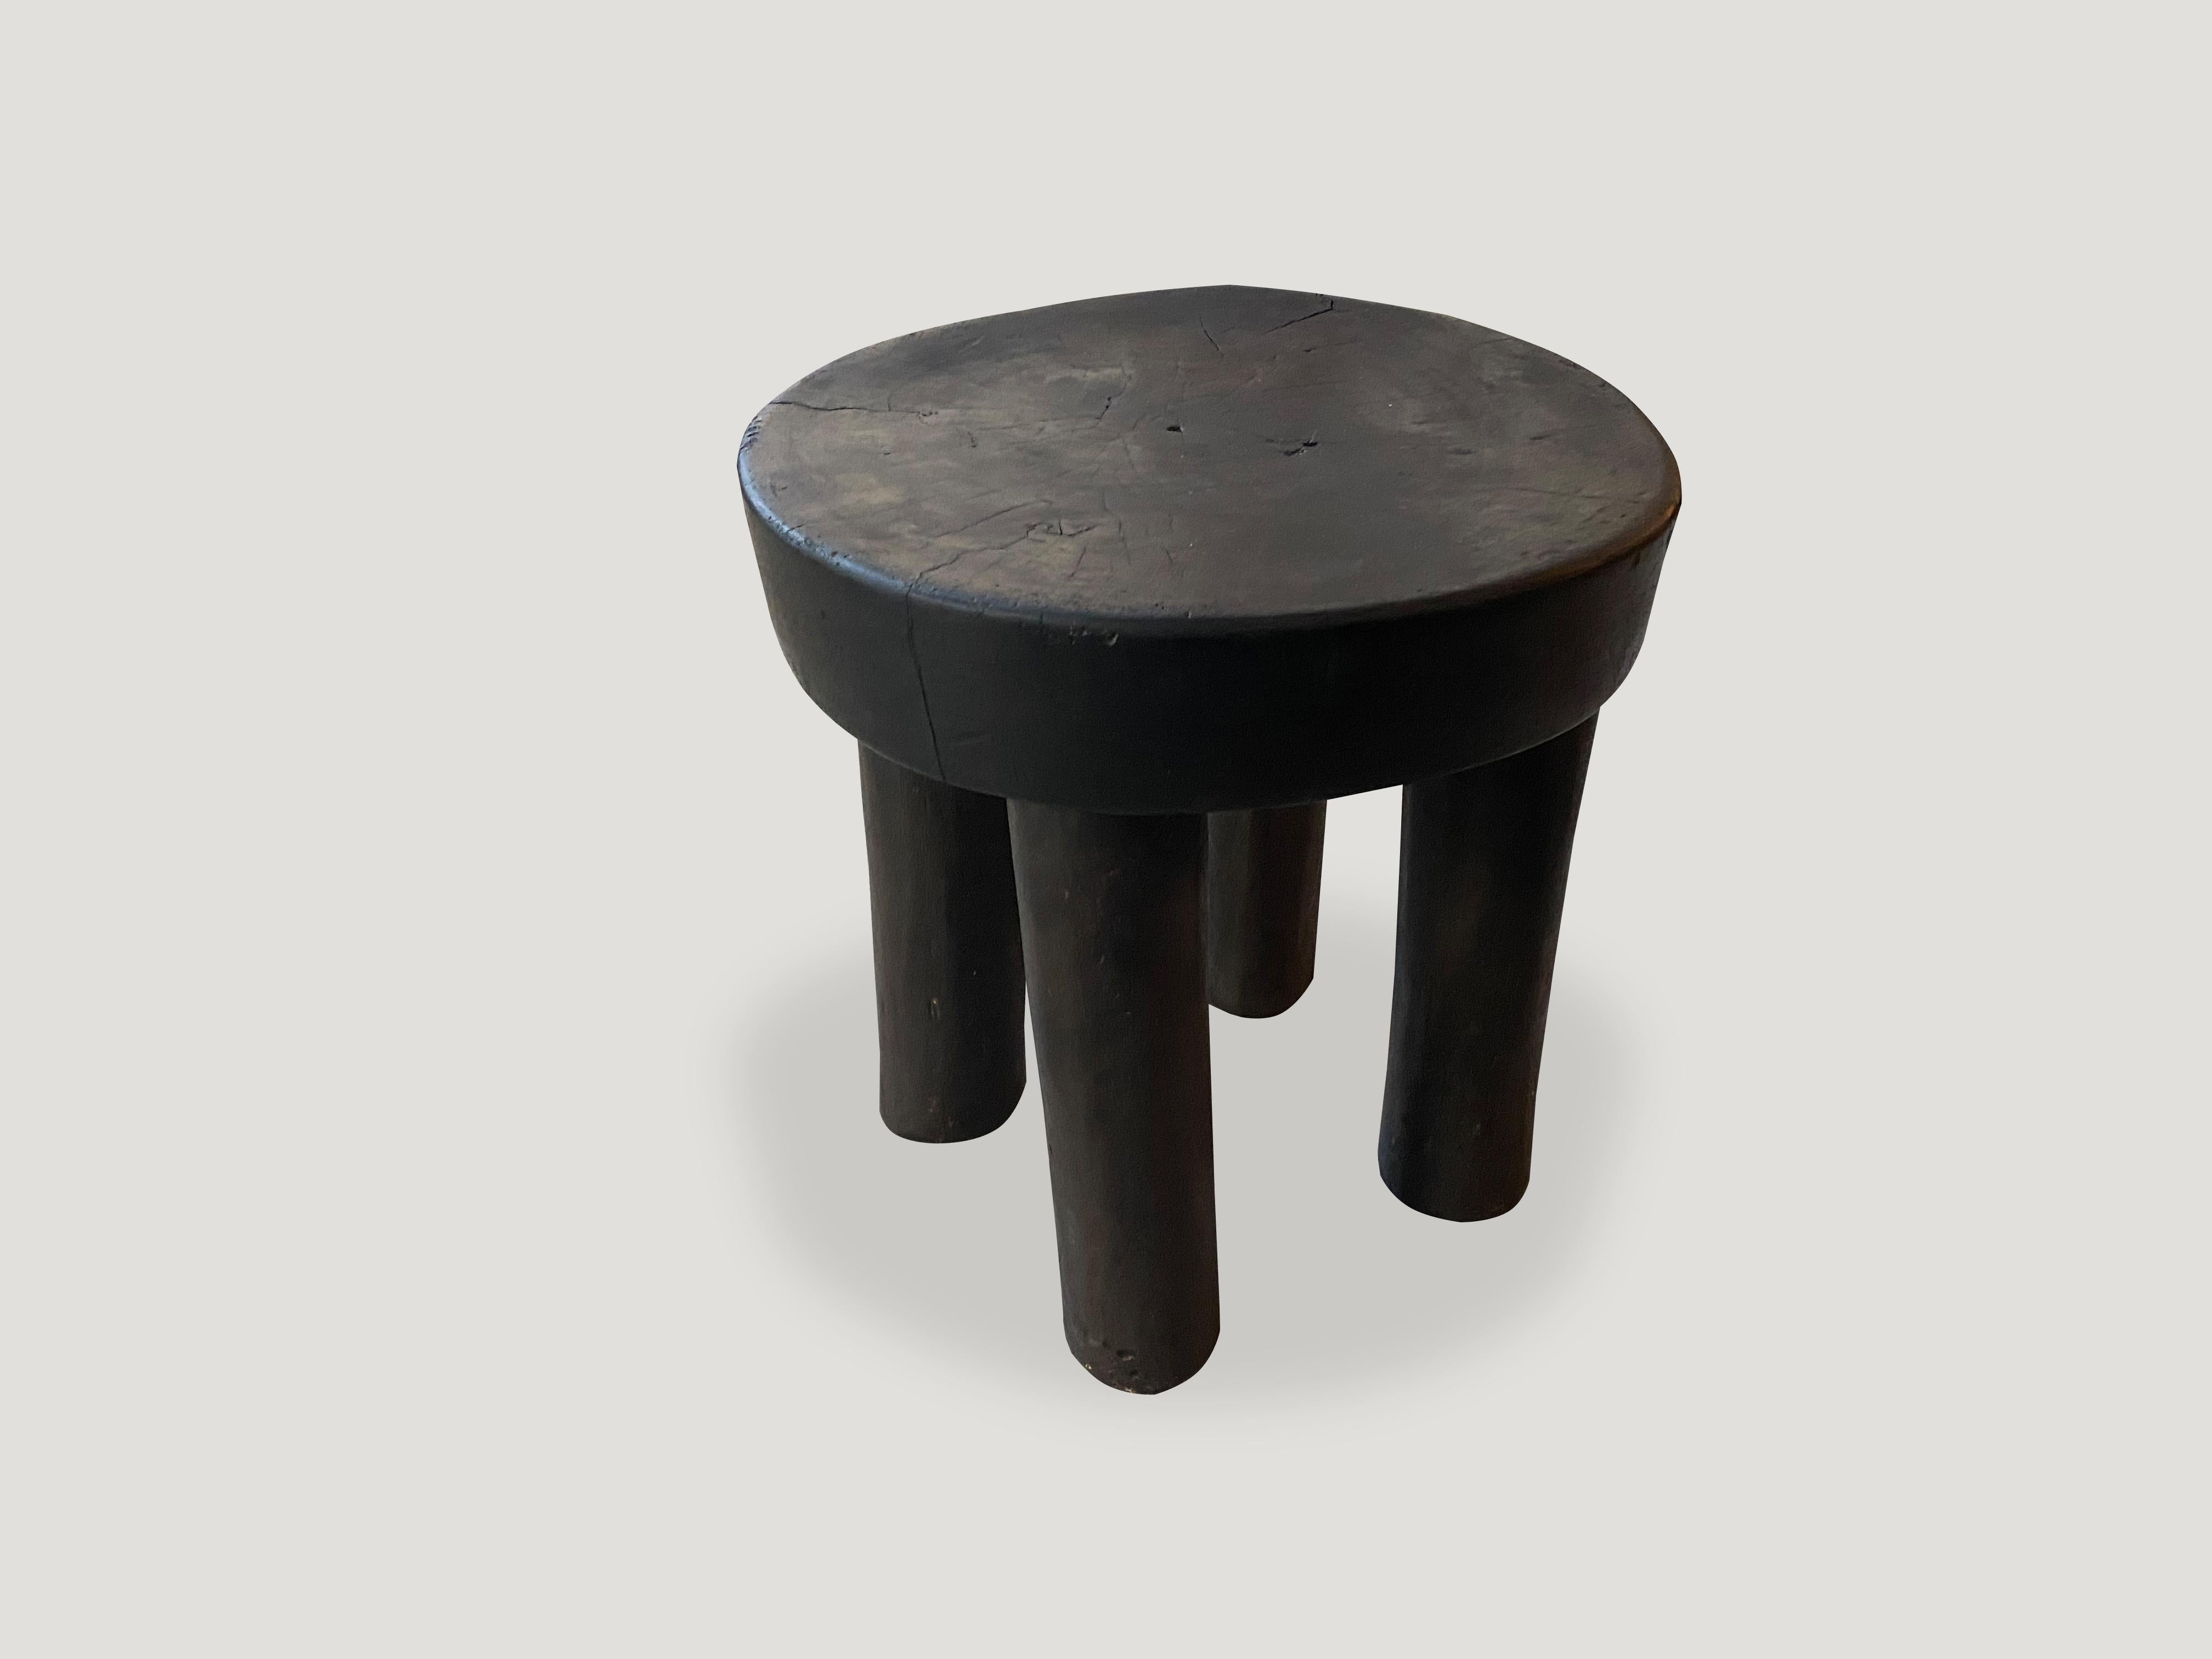 Hand carved African mahogany wood stool or side table. Great for placing a book or perhaps towels in a bathroom, magazines etc.

This stool or side table was sourced in the spirit of wabi-sabi, a Japanese philosophy that beauty can be found in